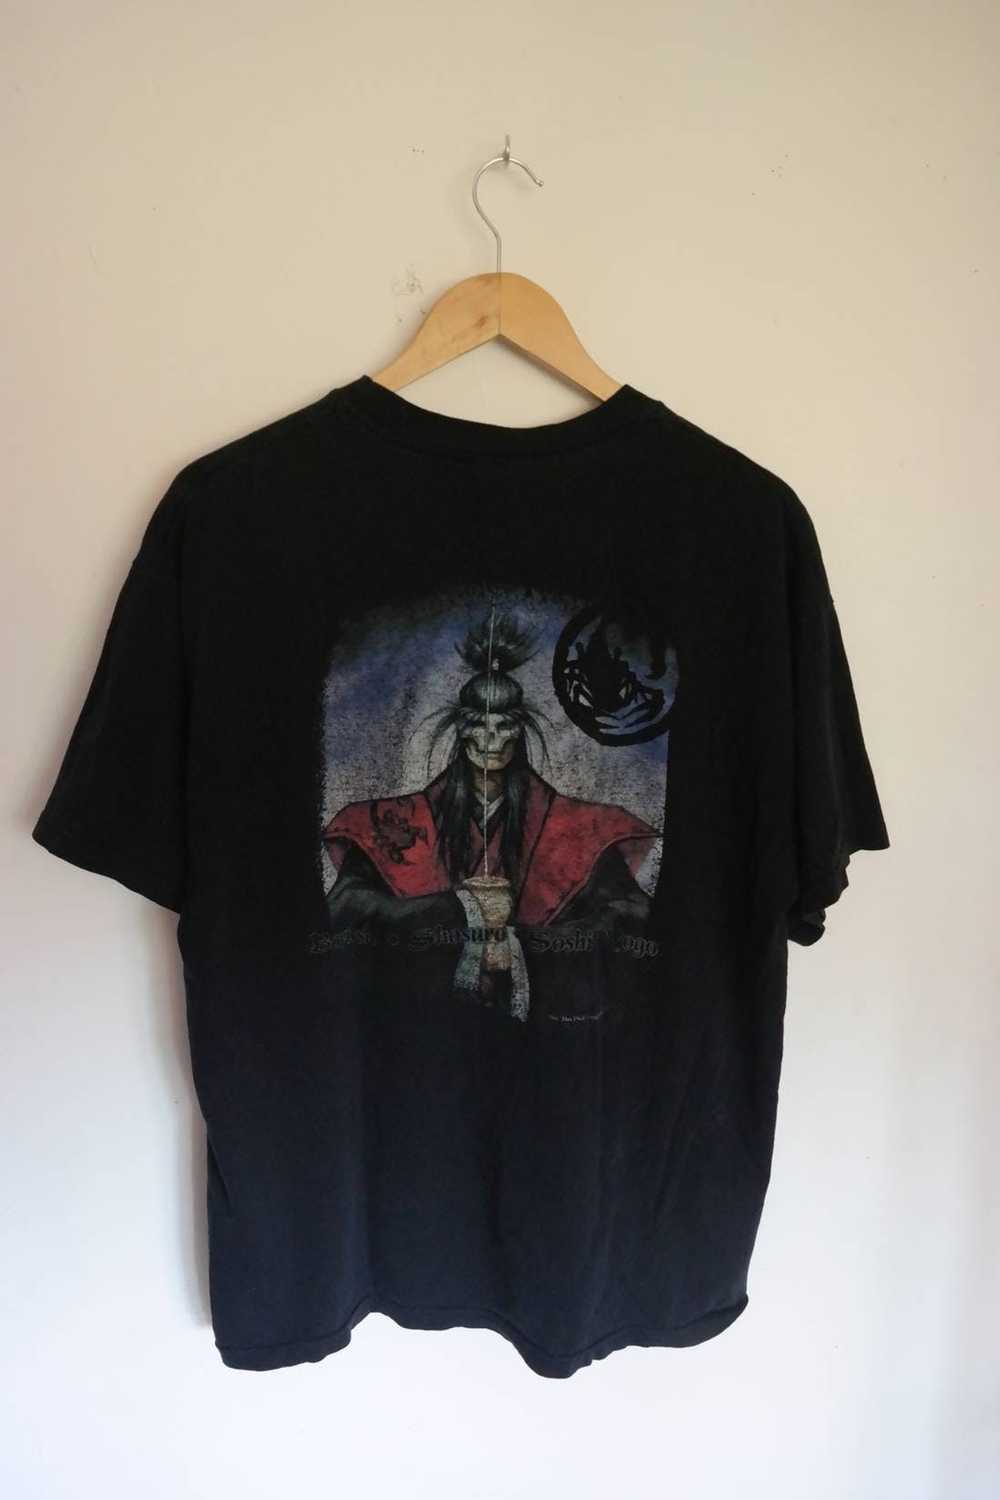 Vintage LEGEND OF THE 5 RINGS T-shirt - image 1